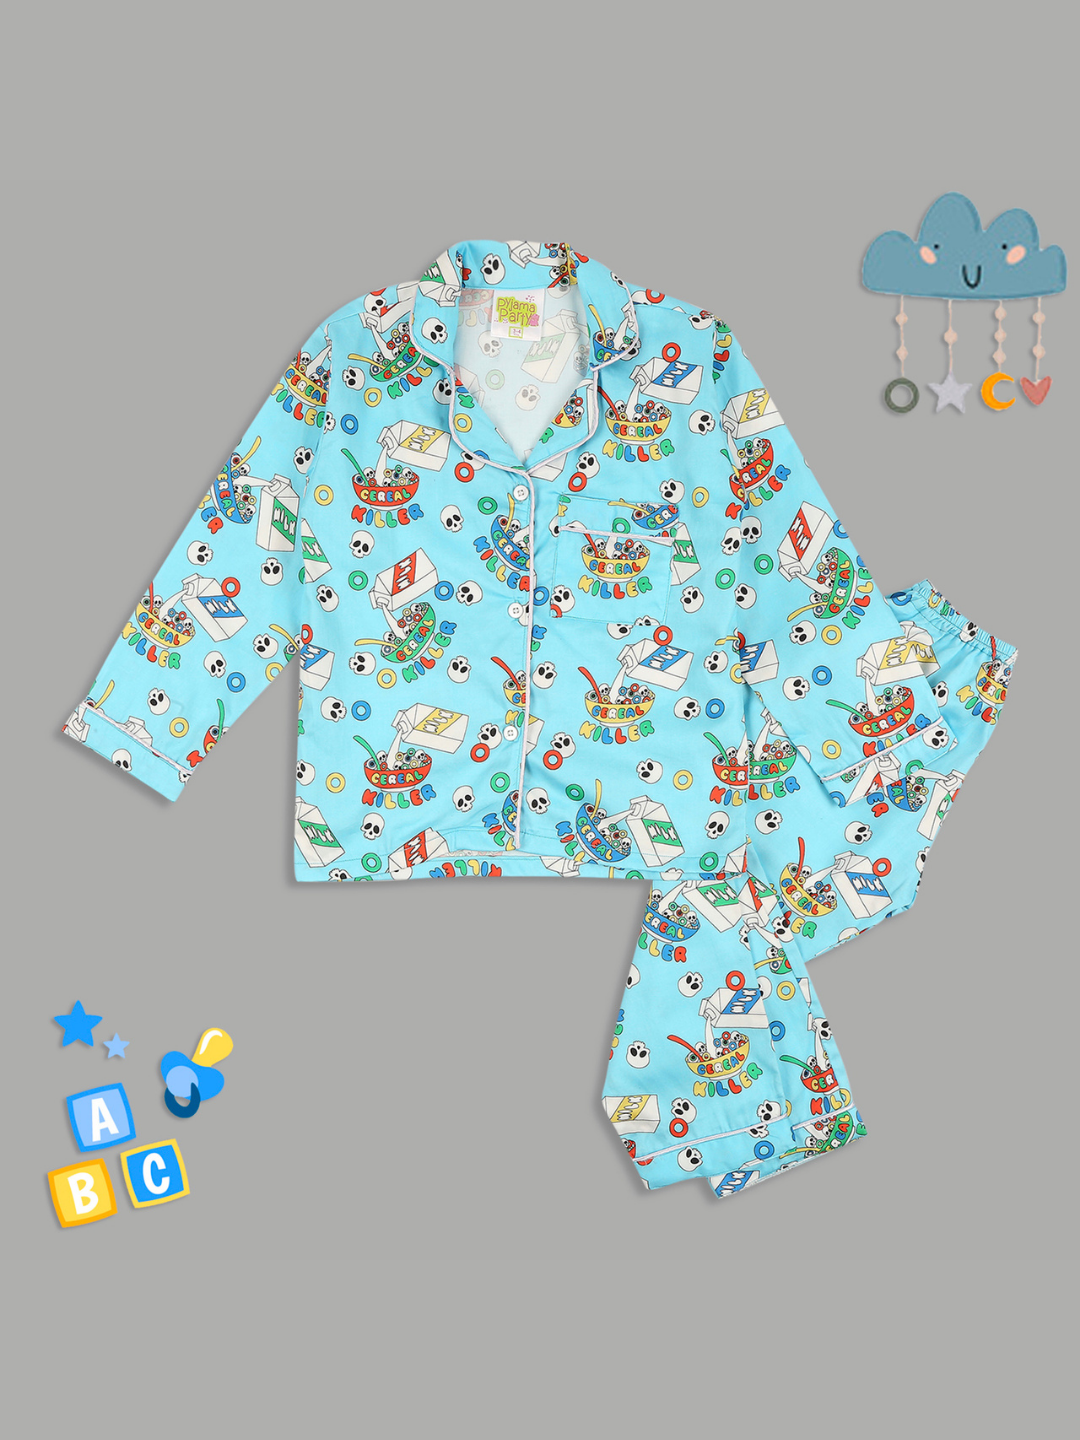 Cereal Killer Kids Button Down Pj Set - Pure Cotton Pj Set with Notched Collar